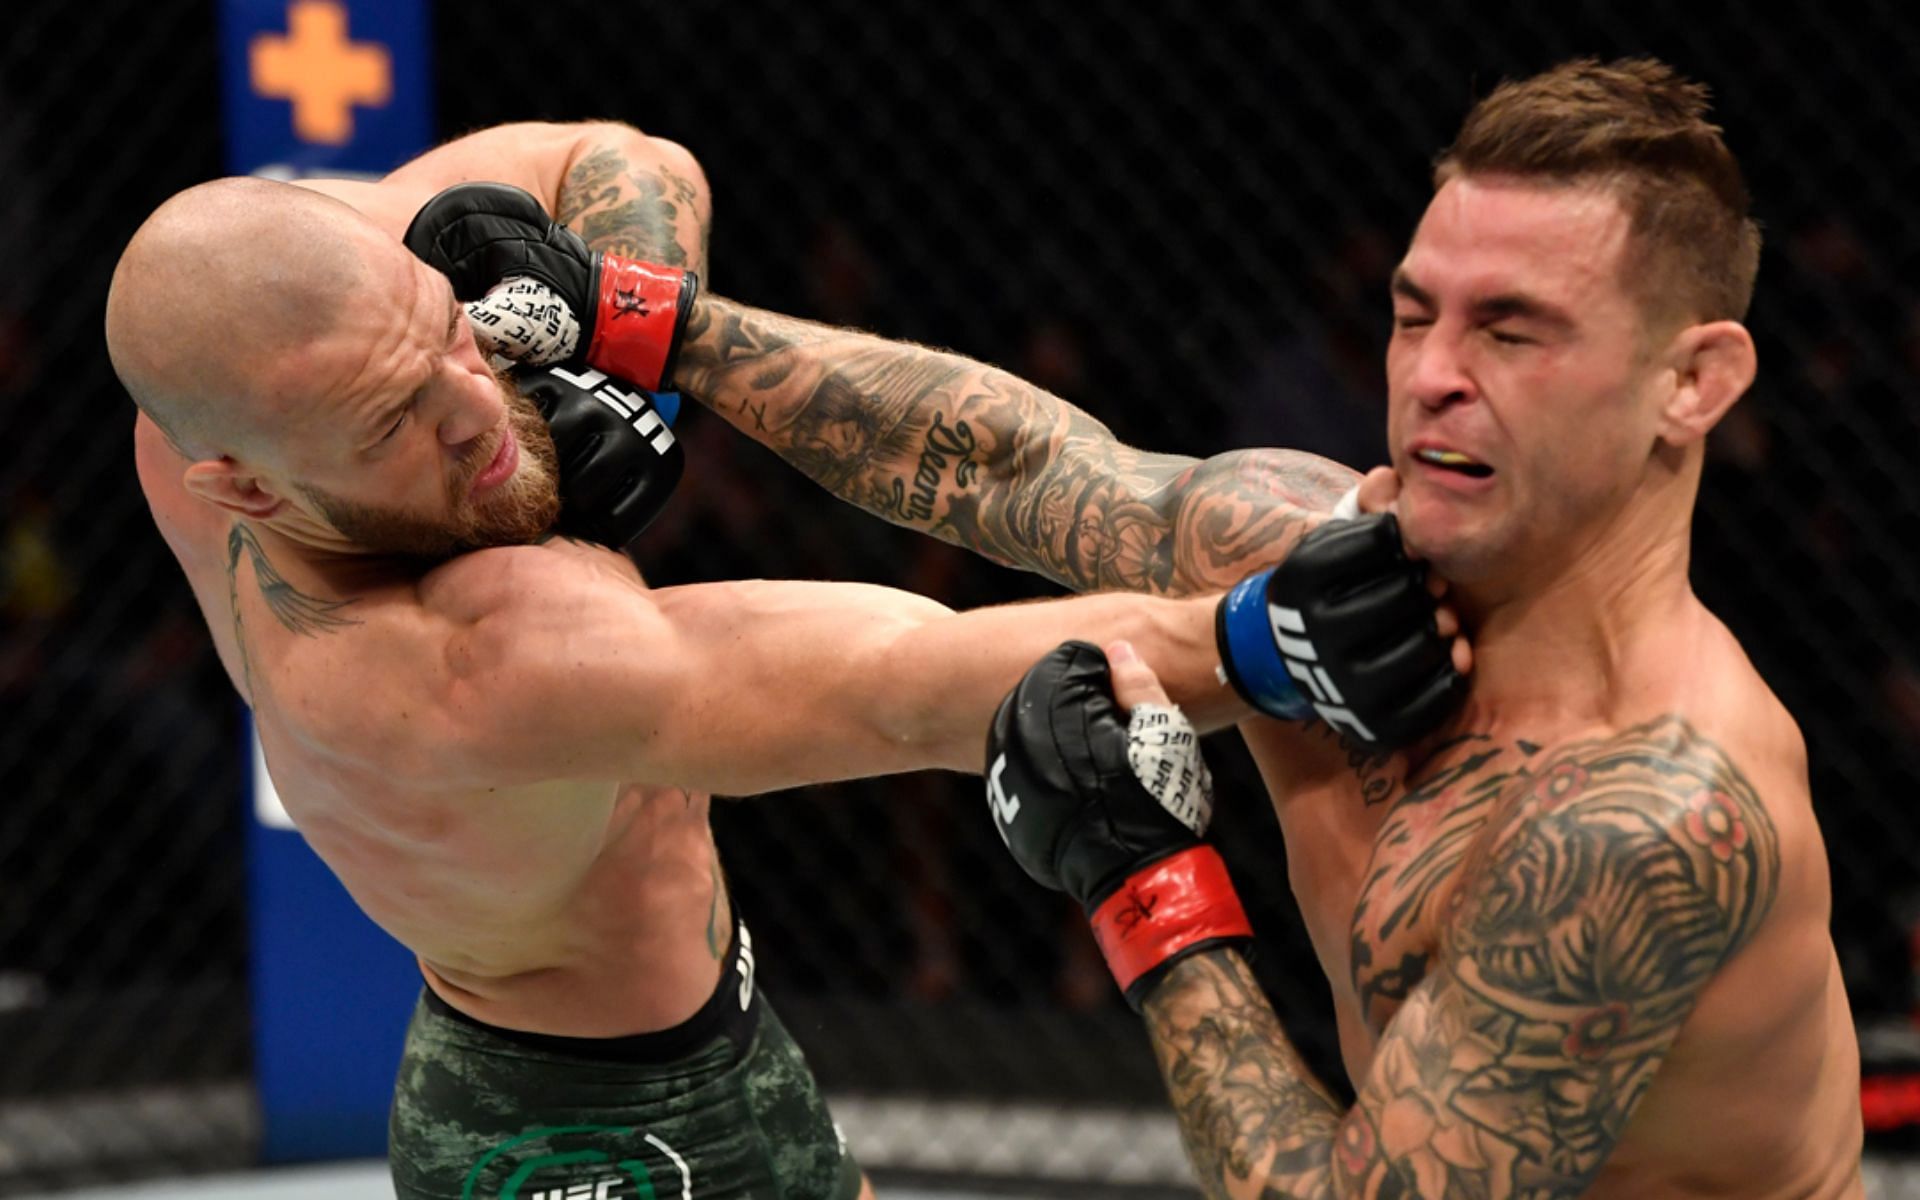 Conor McGregor failed to impress with his performance against Dustin Poirier at UFC 257